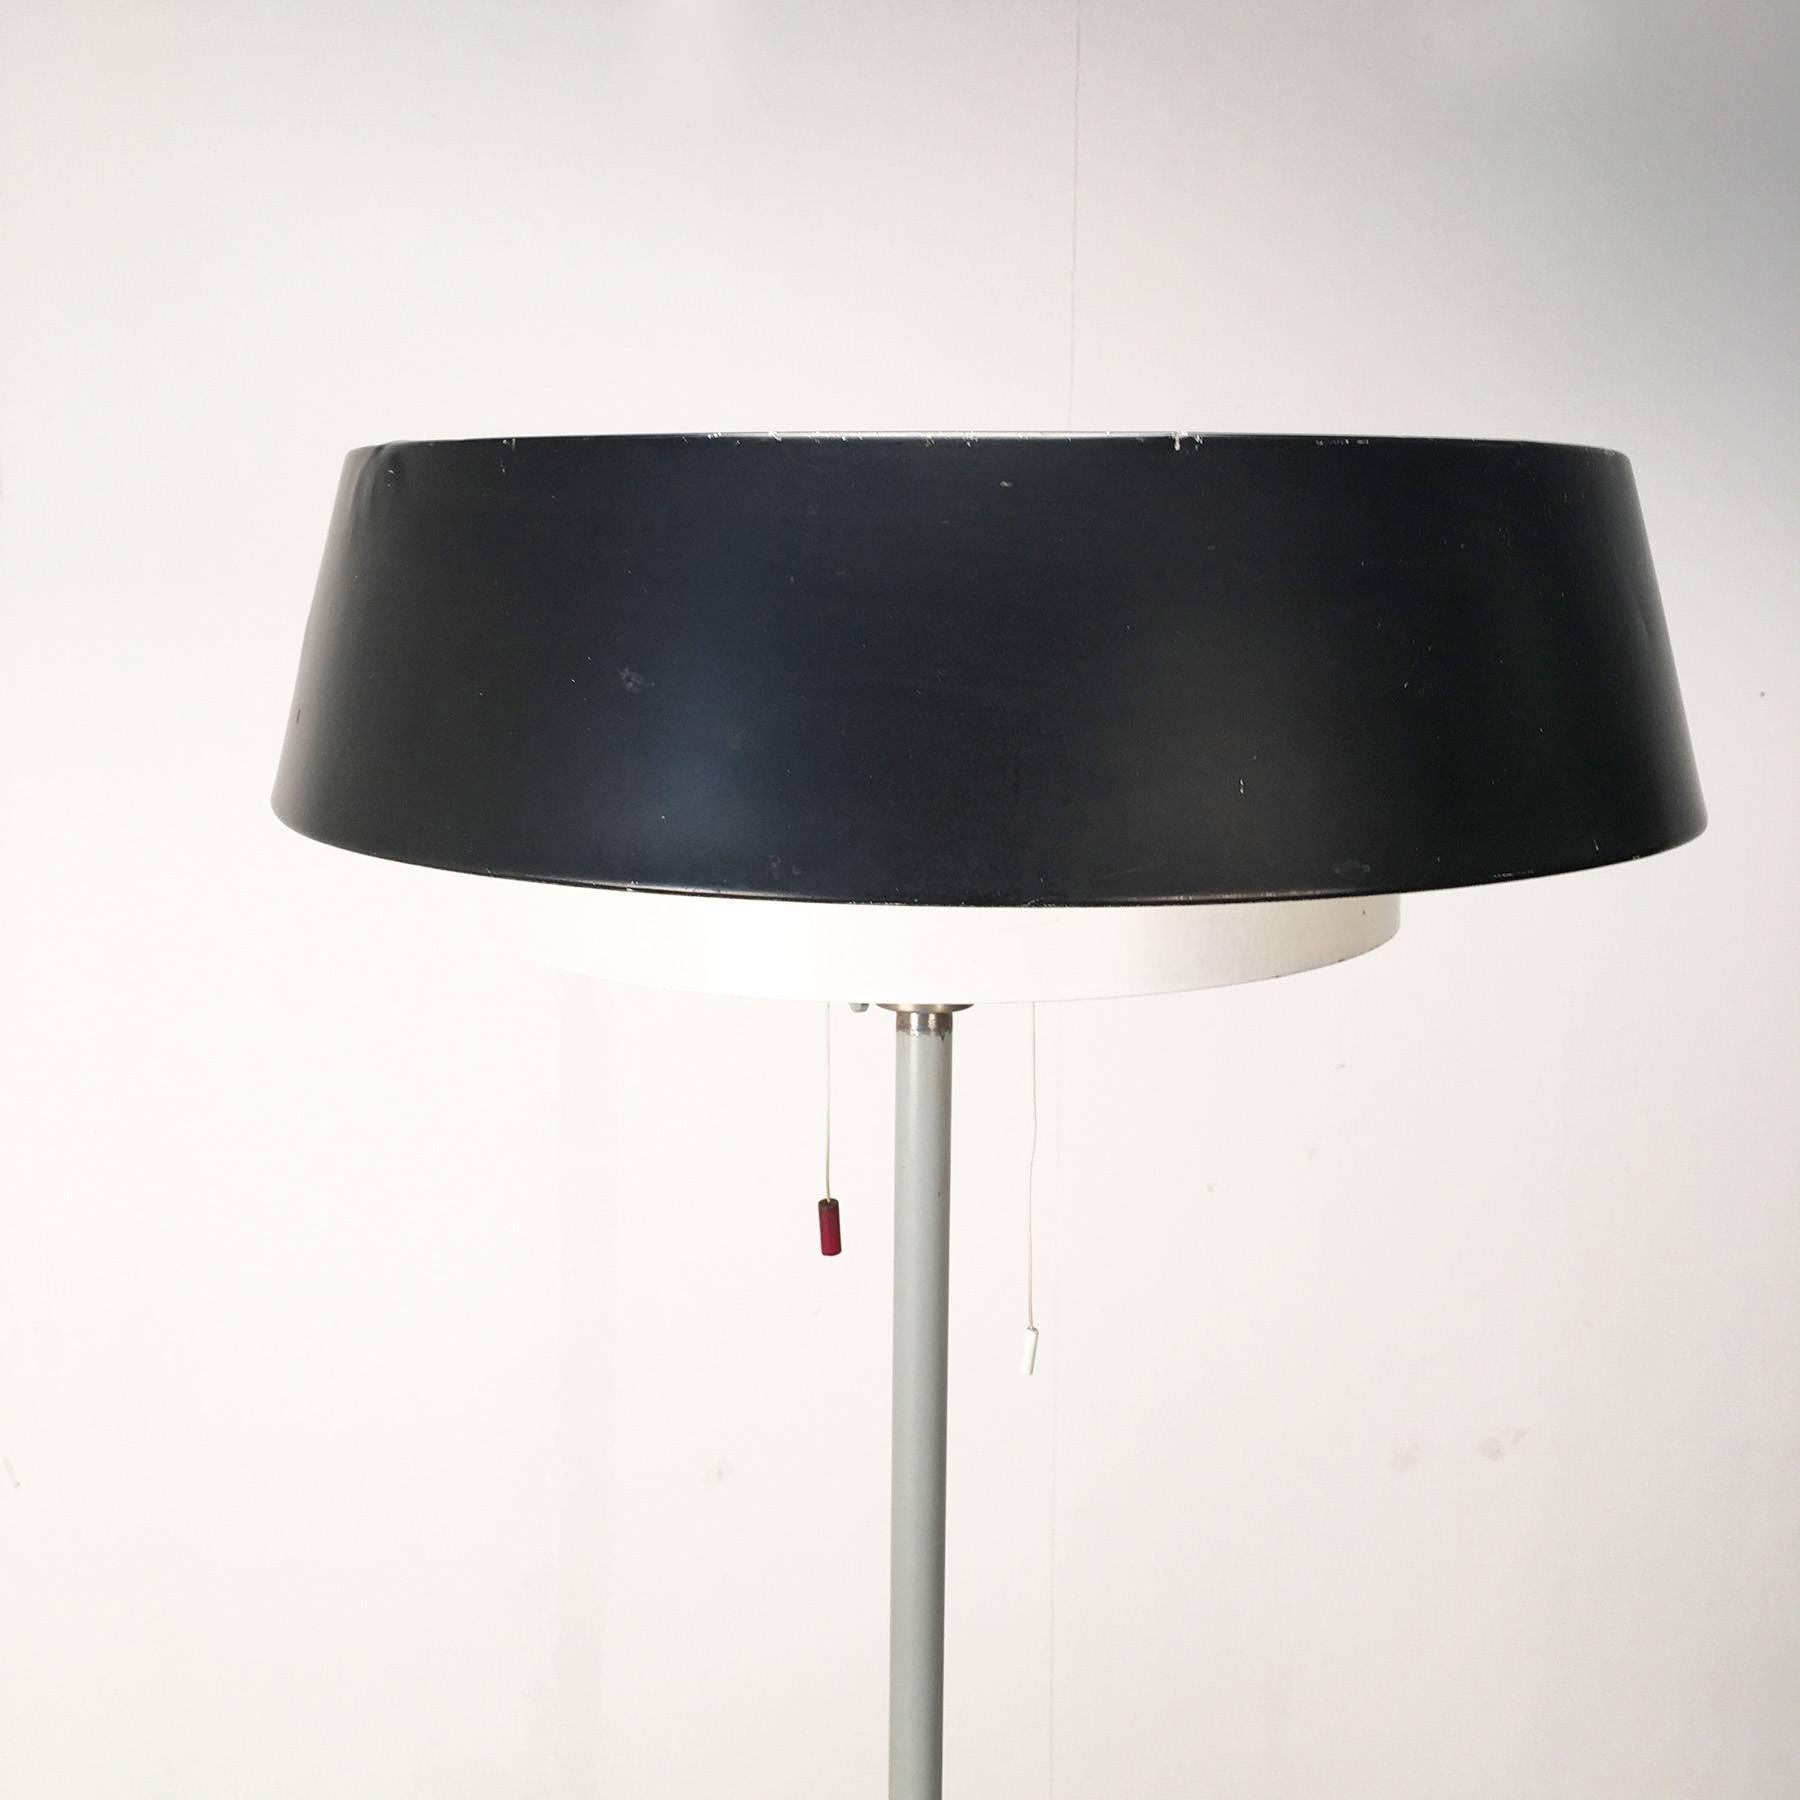 Floor lamp, designed in the 1950s by Niek Hiemstra, manufactured in the Netherlands by Evolux. This lamp is a beautiful example of the Dutch Mid-Century Industrial Design.
The lamp has four-light bulbs, one uplight and three downlights. Uplight and